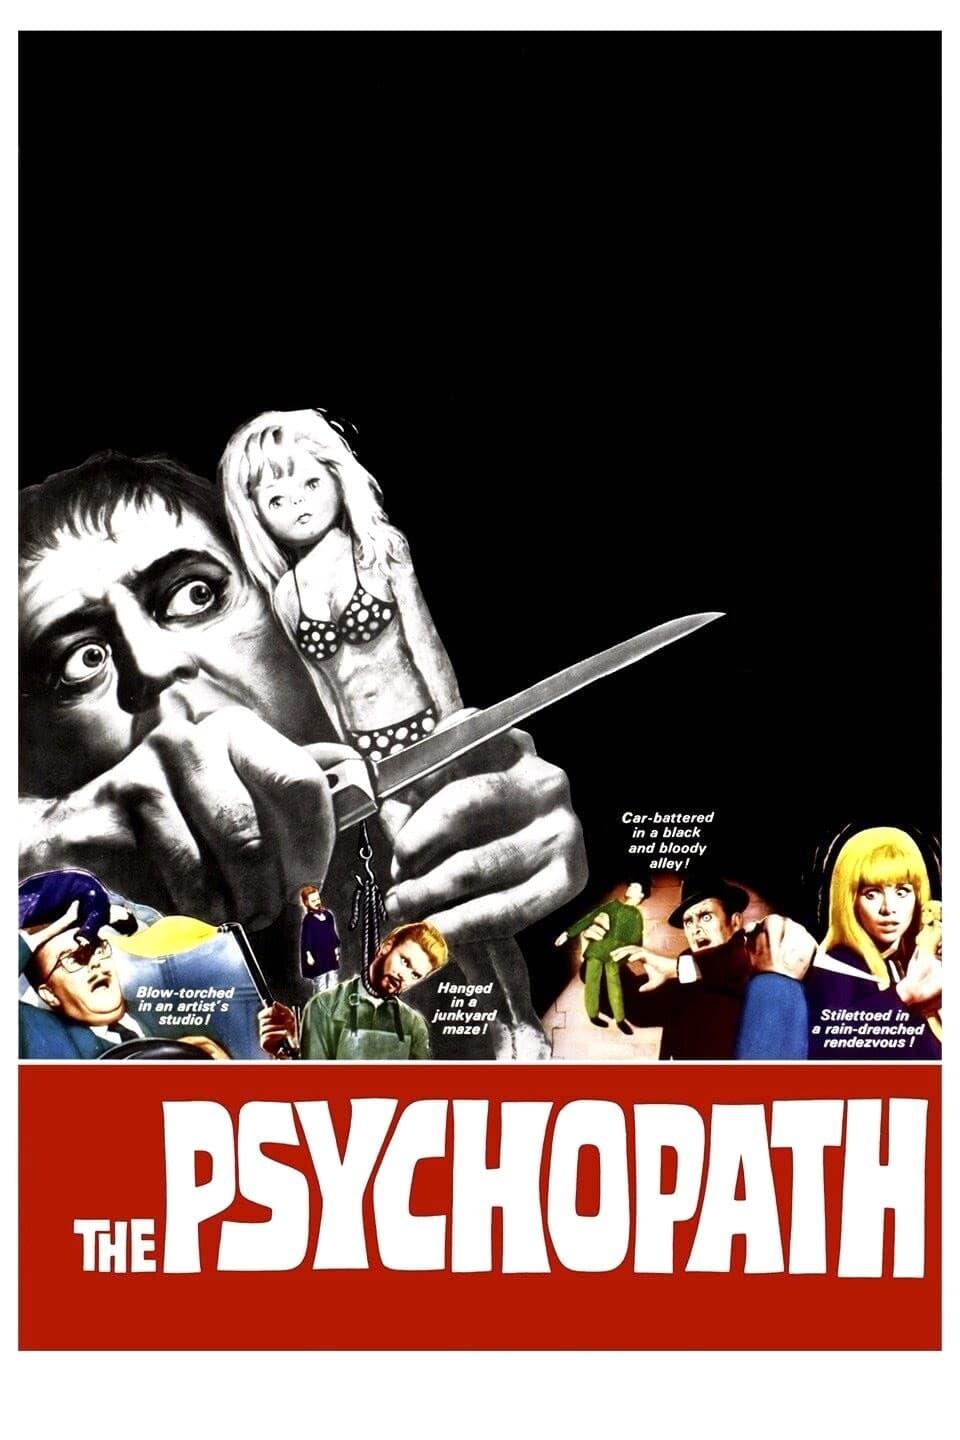 The Psychopath poster